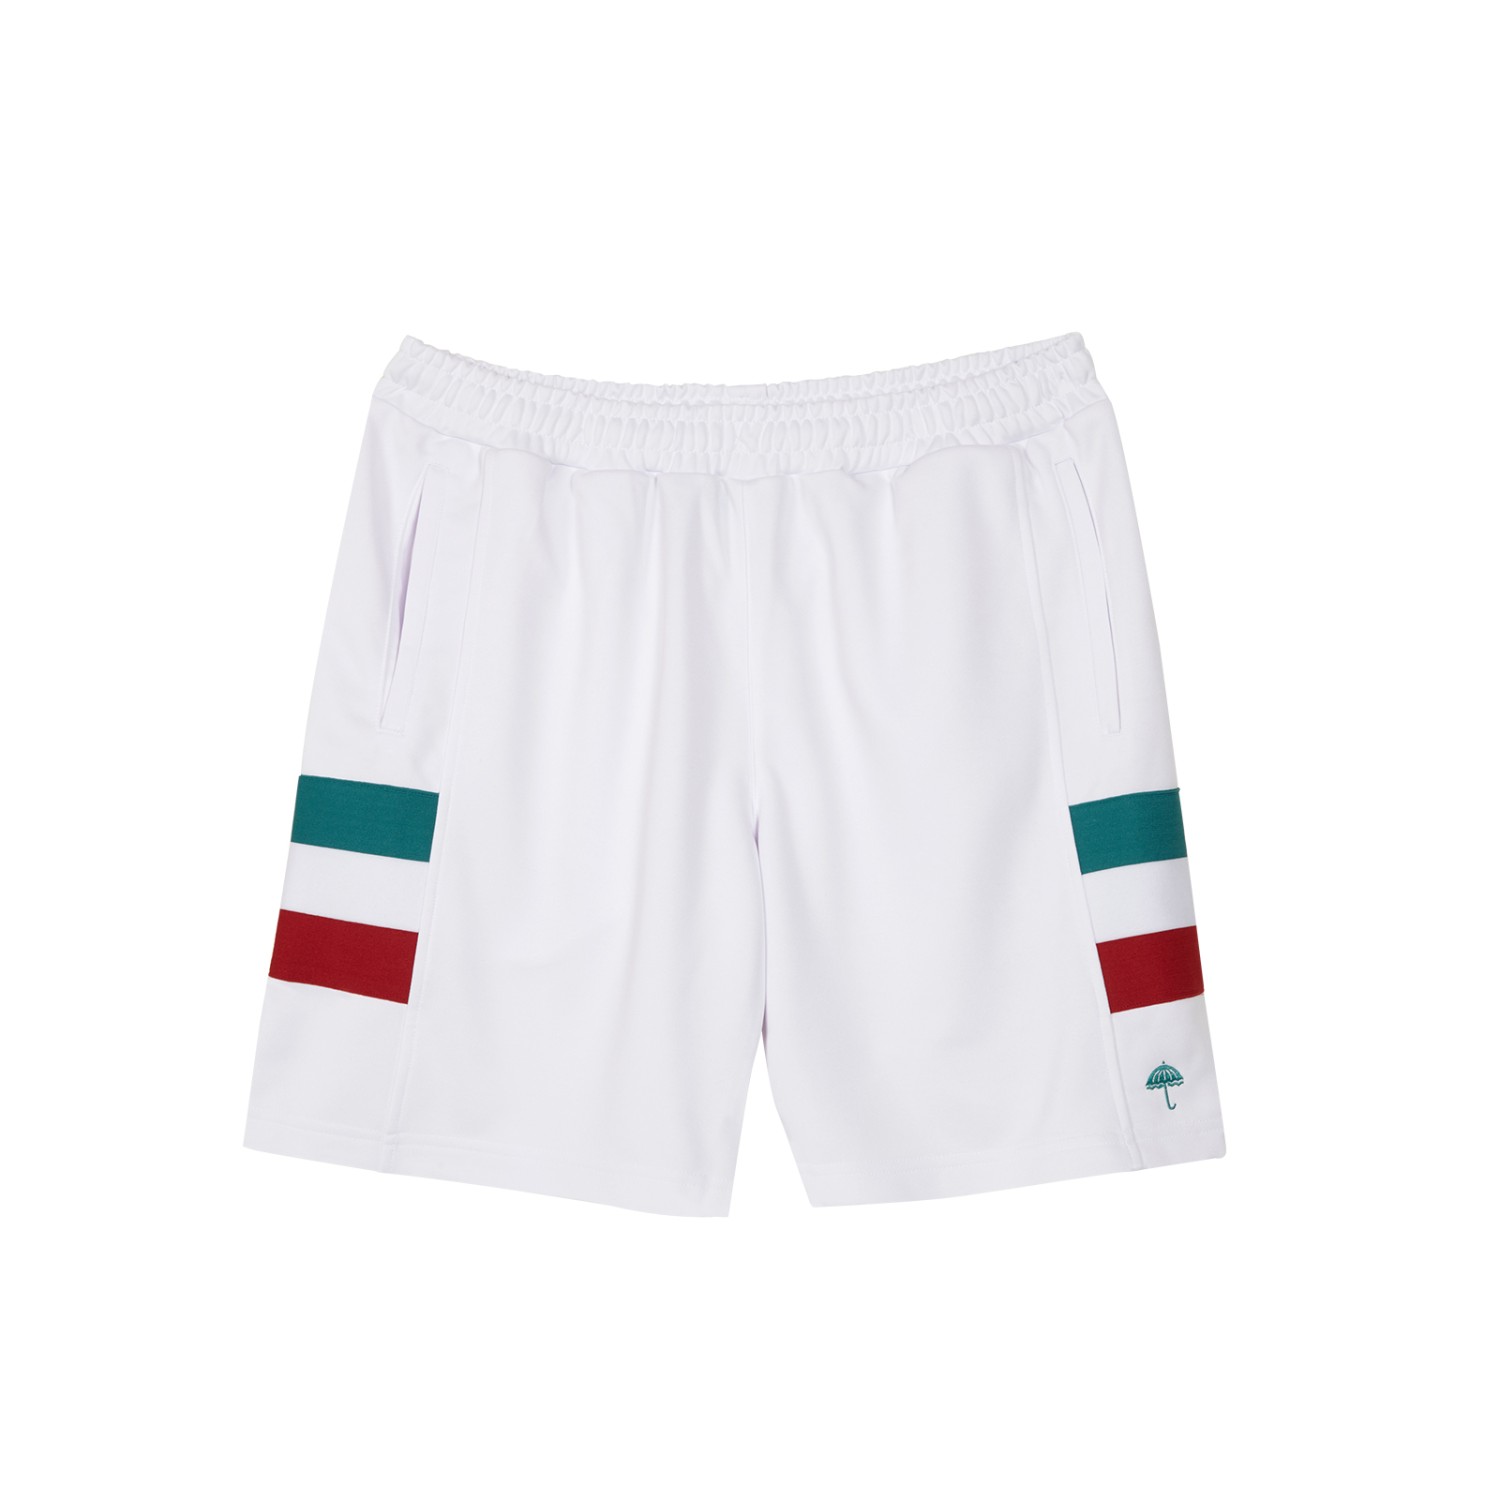 PRINCE SHORT OFF WHITE